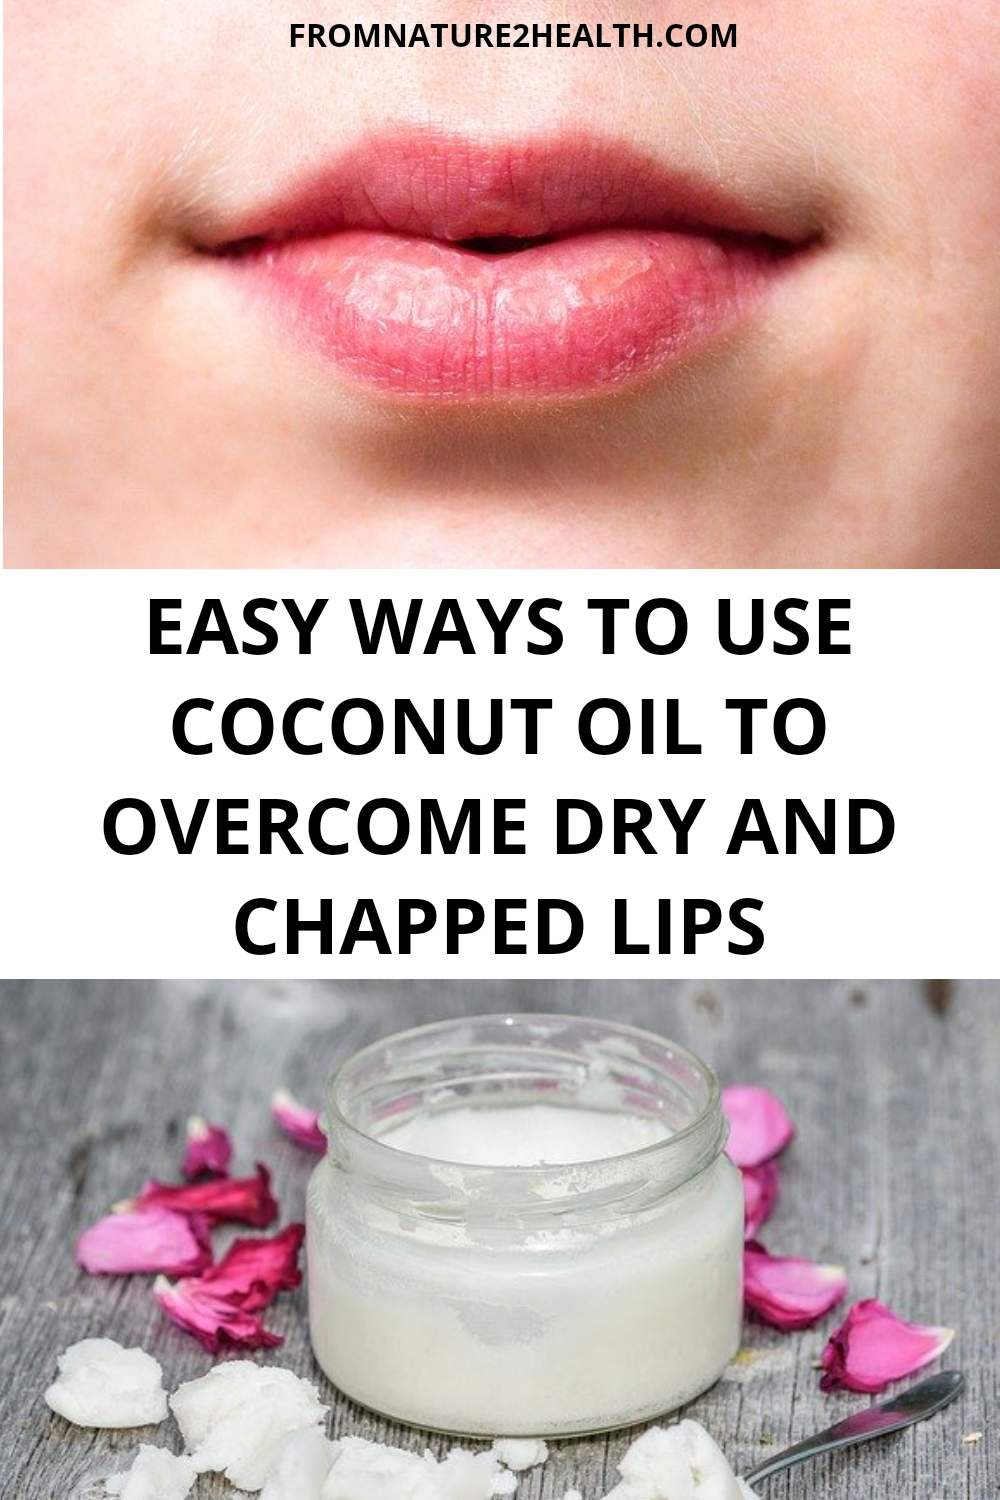 Easy Ways to Use Coconut Oil to Overcome Dry and Chapped Lips